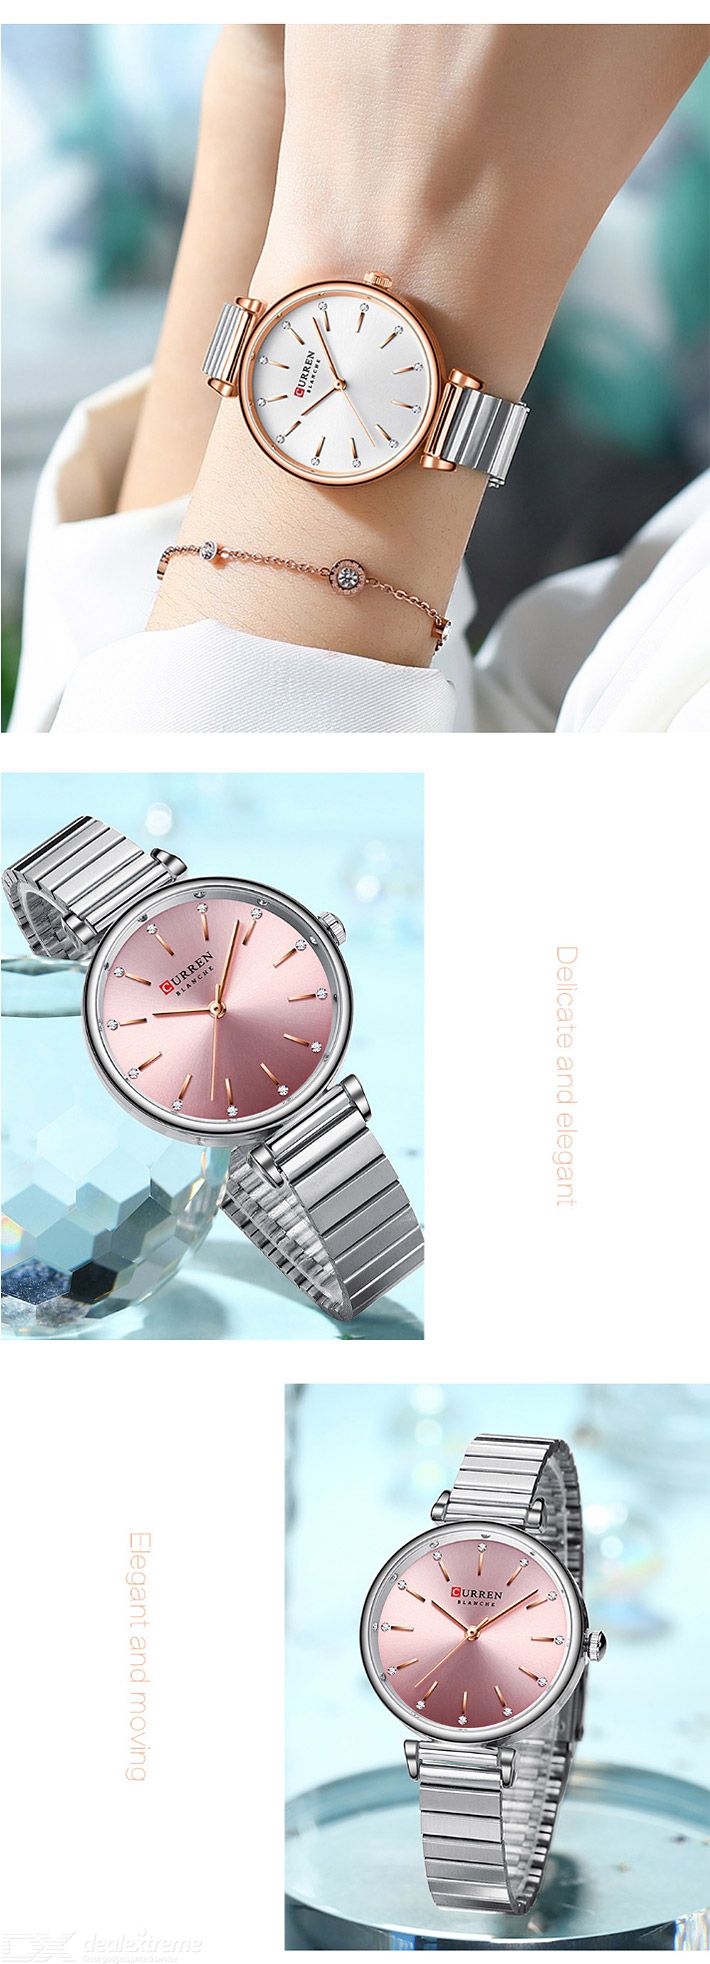 Curren 9081 Stainless Steel Analog Watch For Women - Time Access store